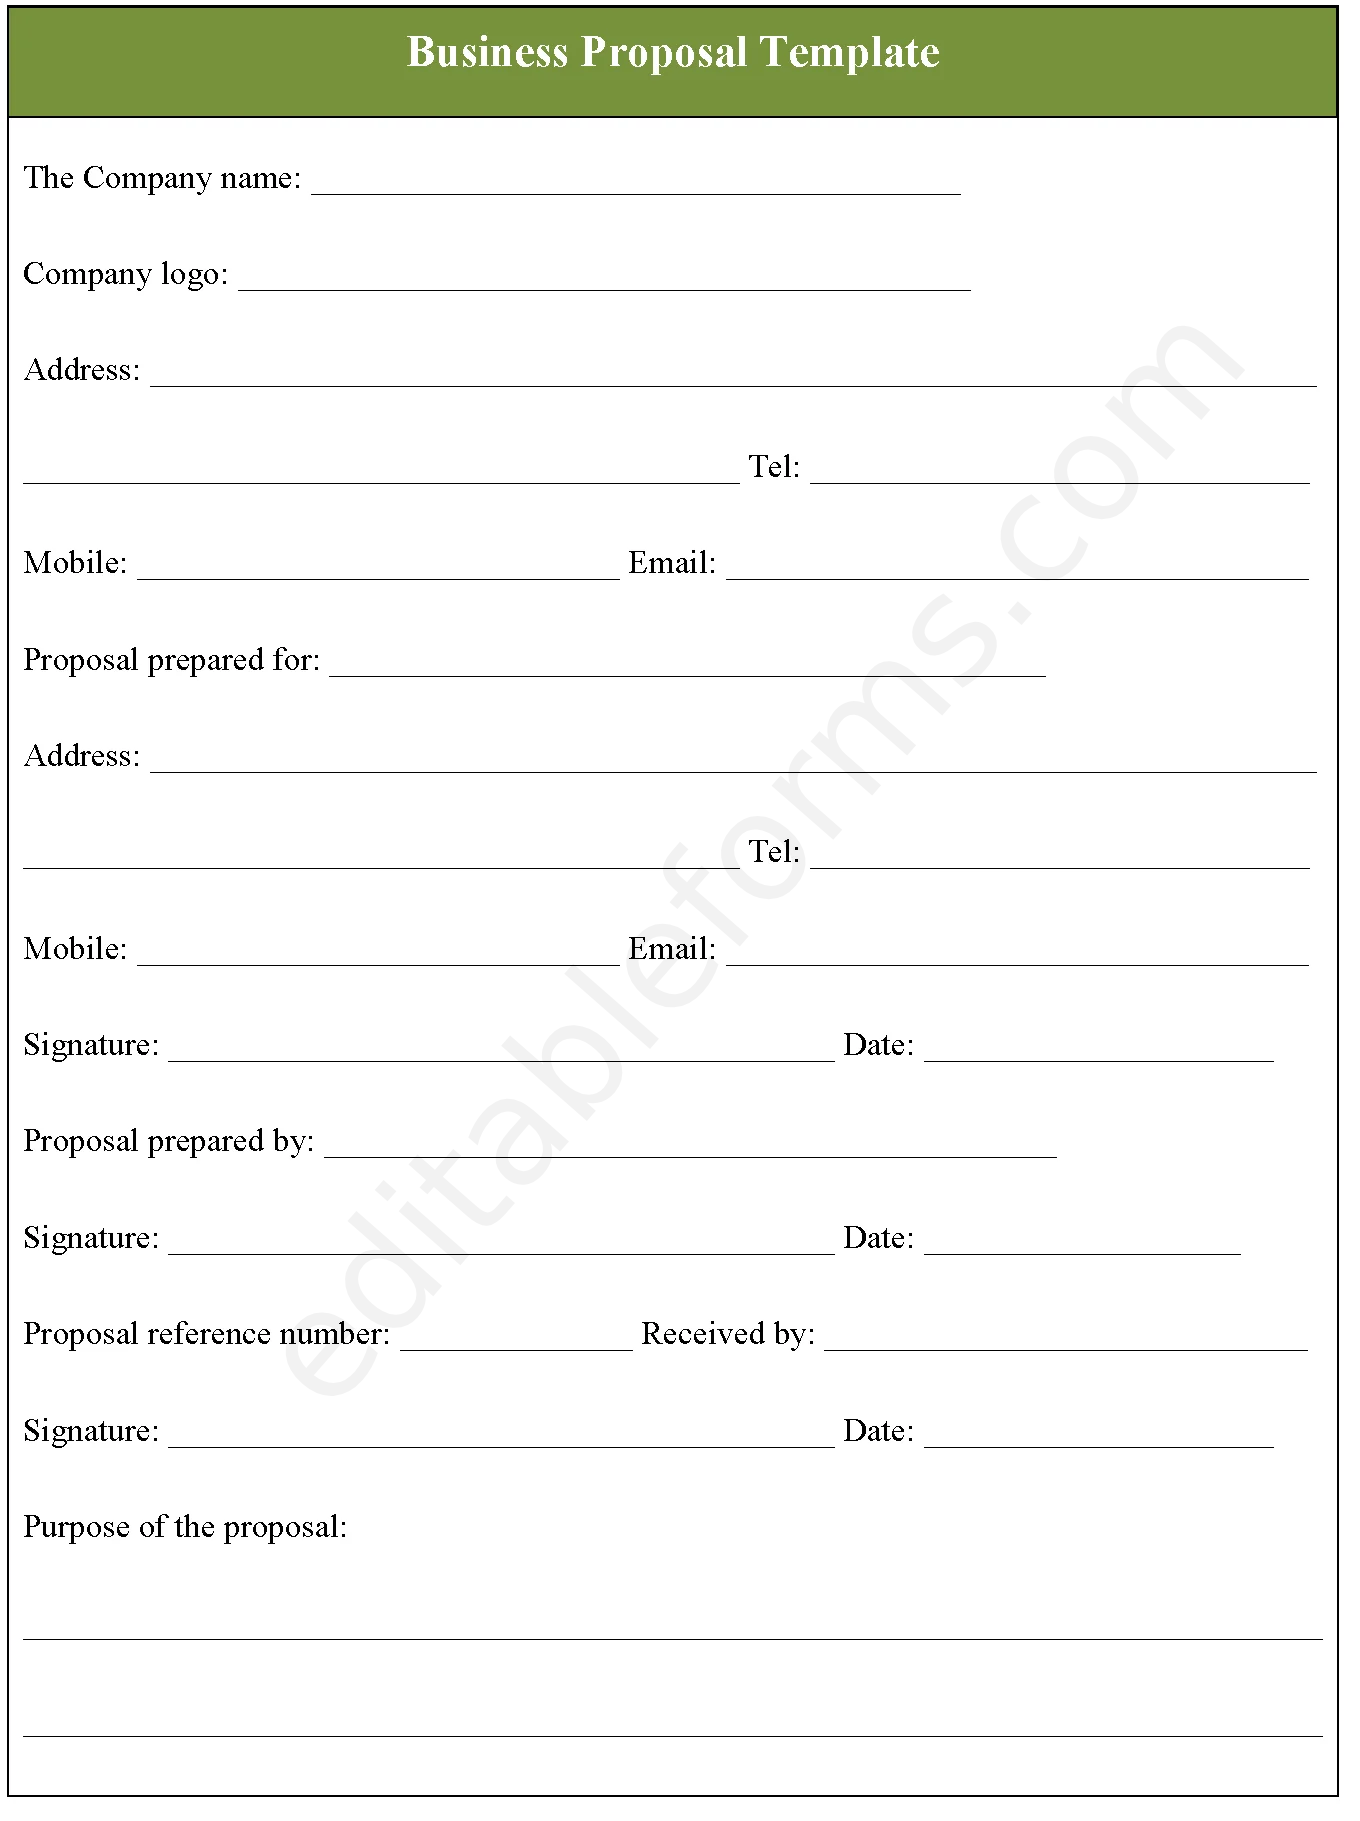 Business Proposal Template Fillable PDF Form